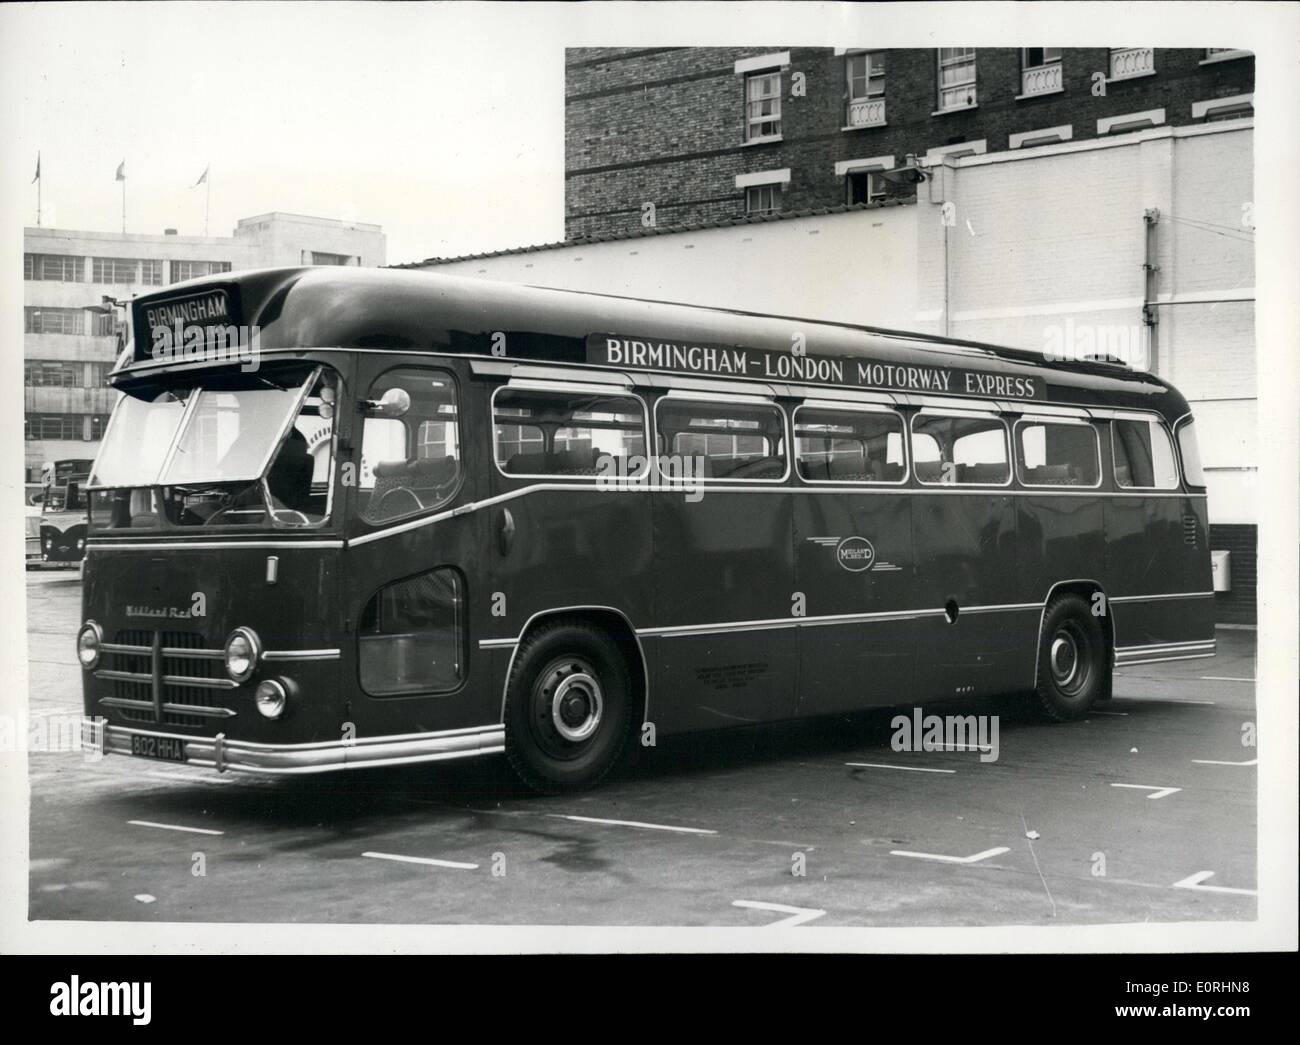 Nov. 11, 1959 - New High Speed Coaches for the Birmingham Motorway: One of the new Midland Red Highspeed Motor Coaches which will operate between London and Birmingham over the new Birmingham Motorway - was to be seen at Victoria Coach Station this morning.The new super-charged single decker coaches are capable of 85 m.p.h.Photo shows View of the first of the new fleet of Midland Red Buses - at Victoria Coach Station this morning. Stock Photo